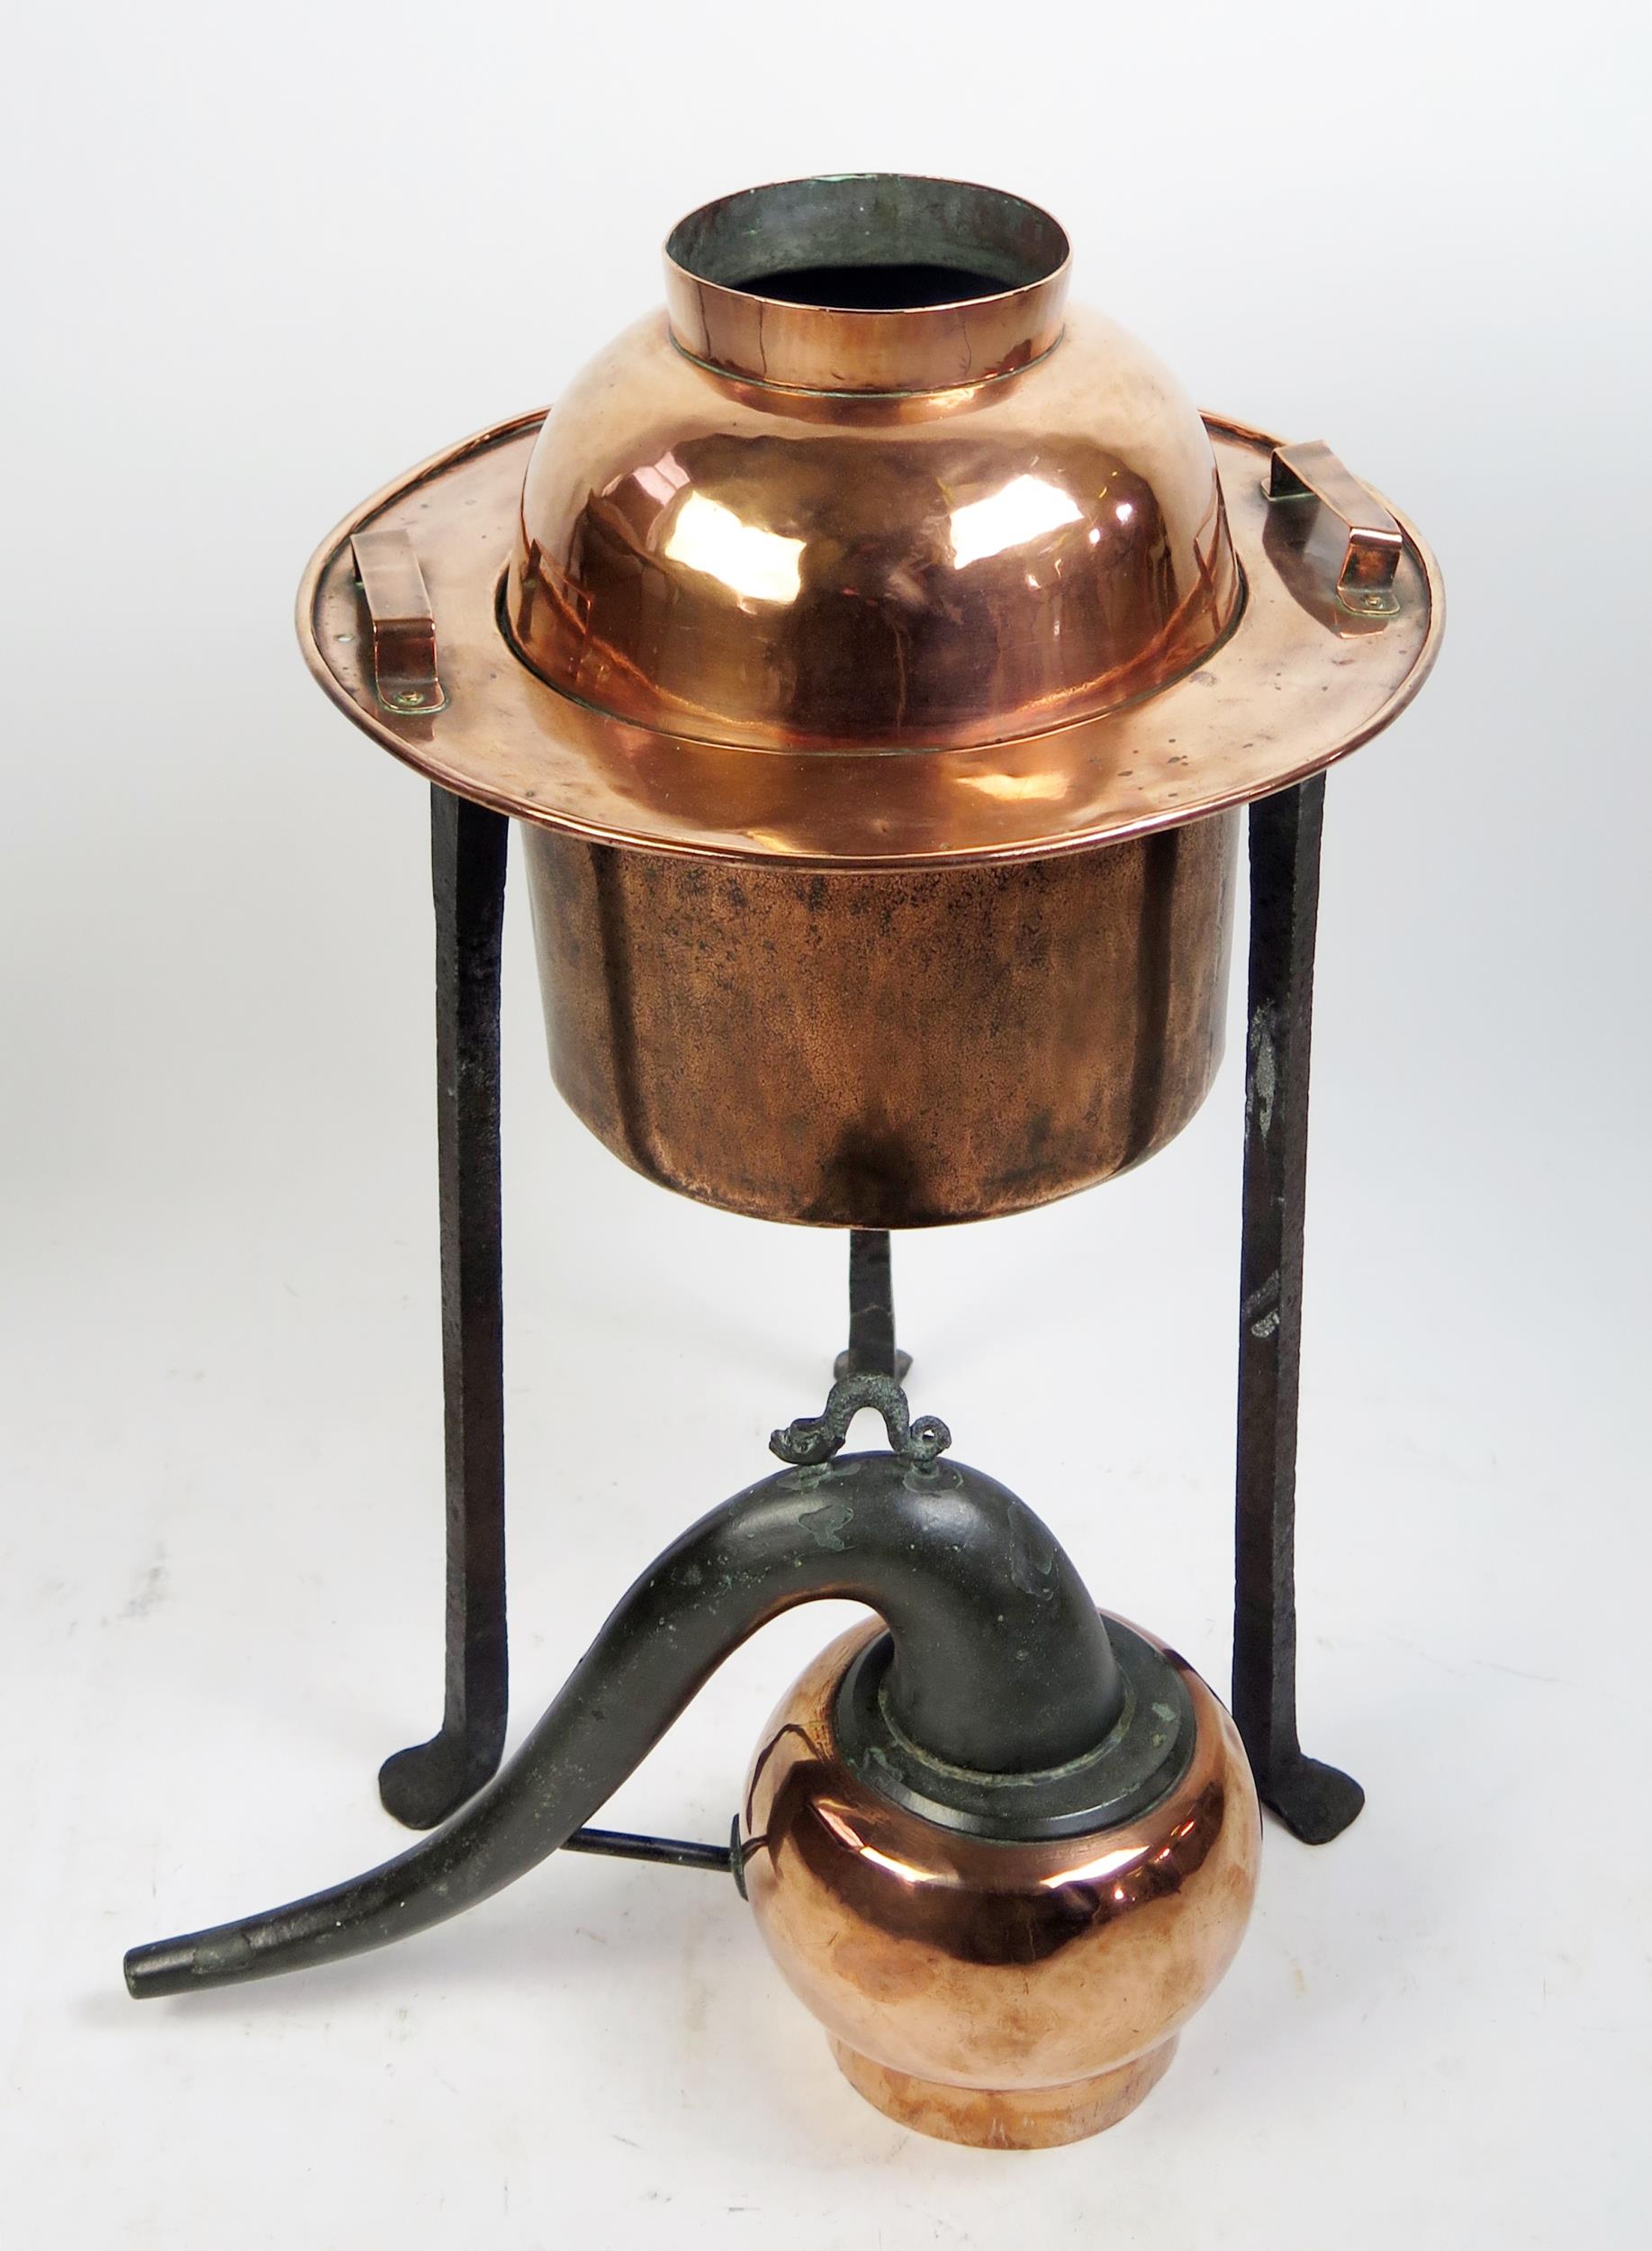 A 19th century French polished copper still, with swept metal spout, with cylindrical reservoir, - Image 3 of 4